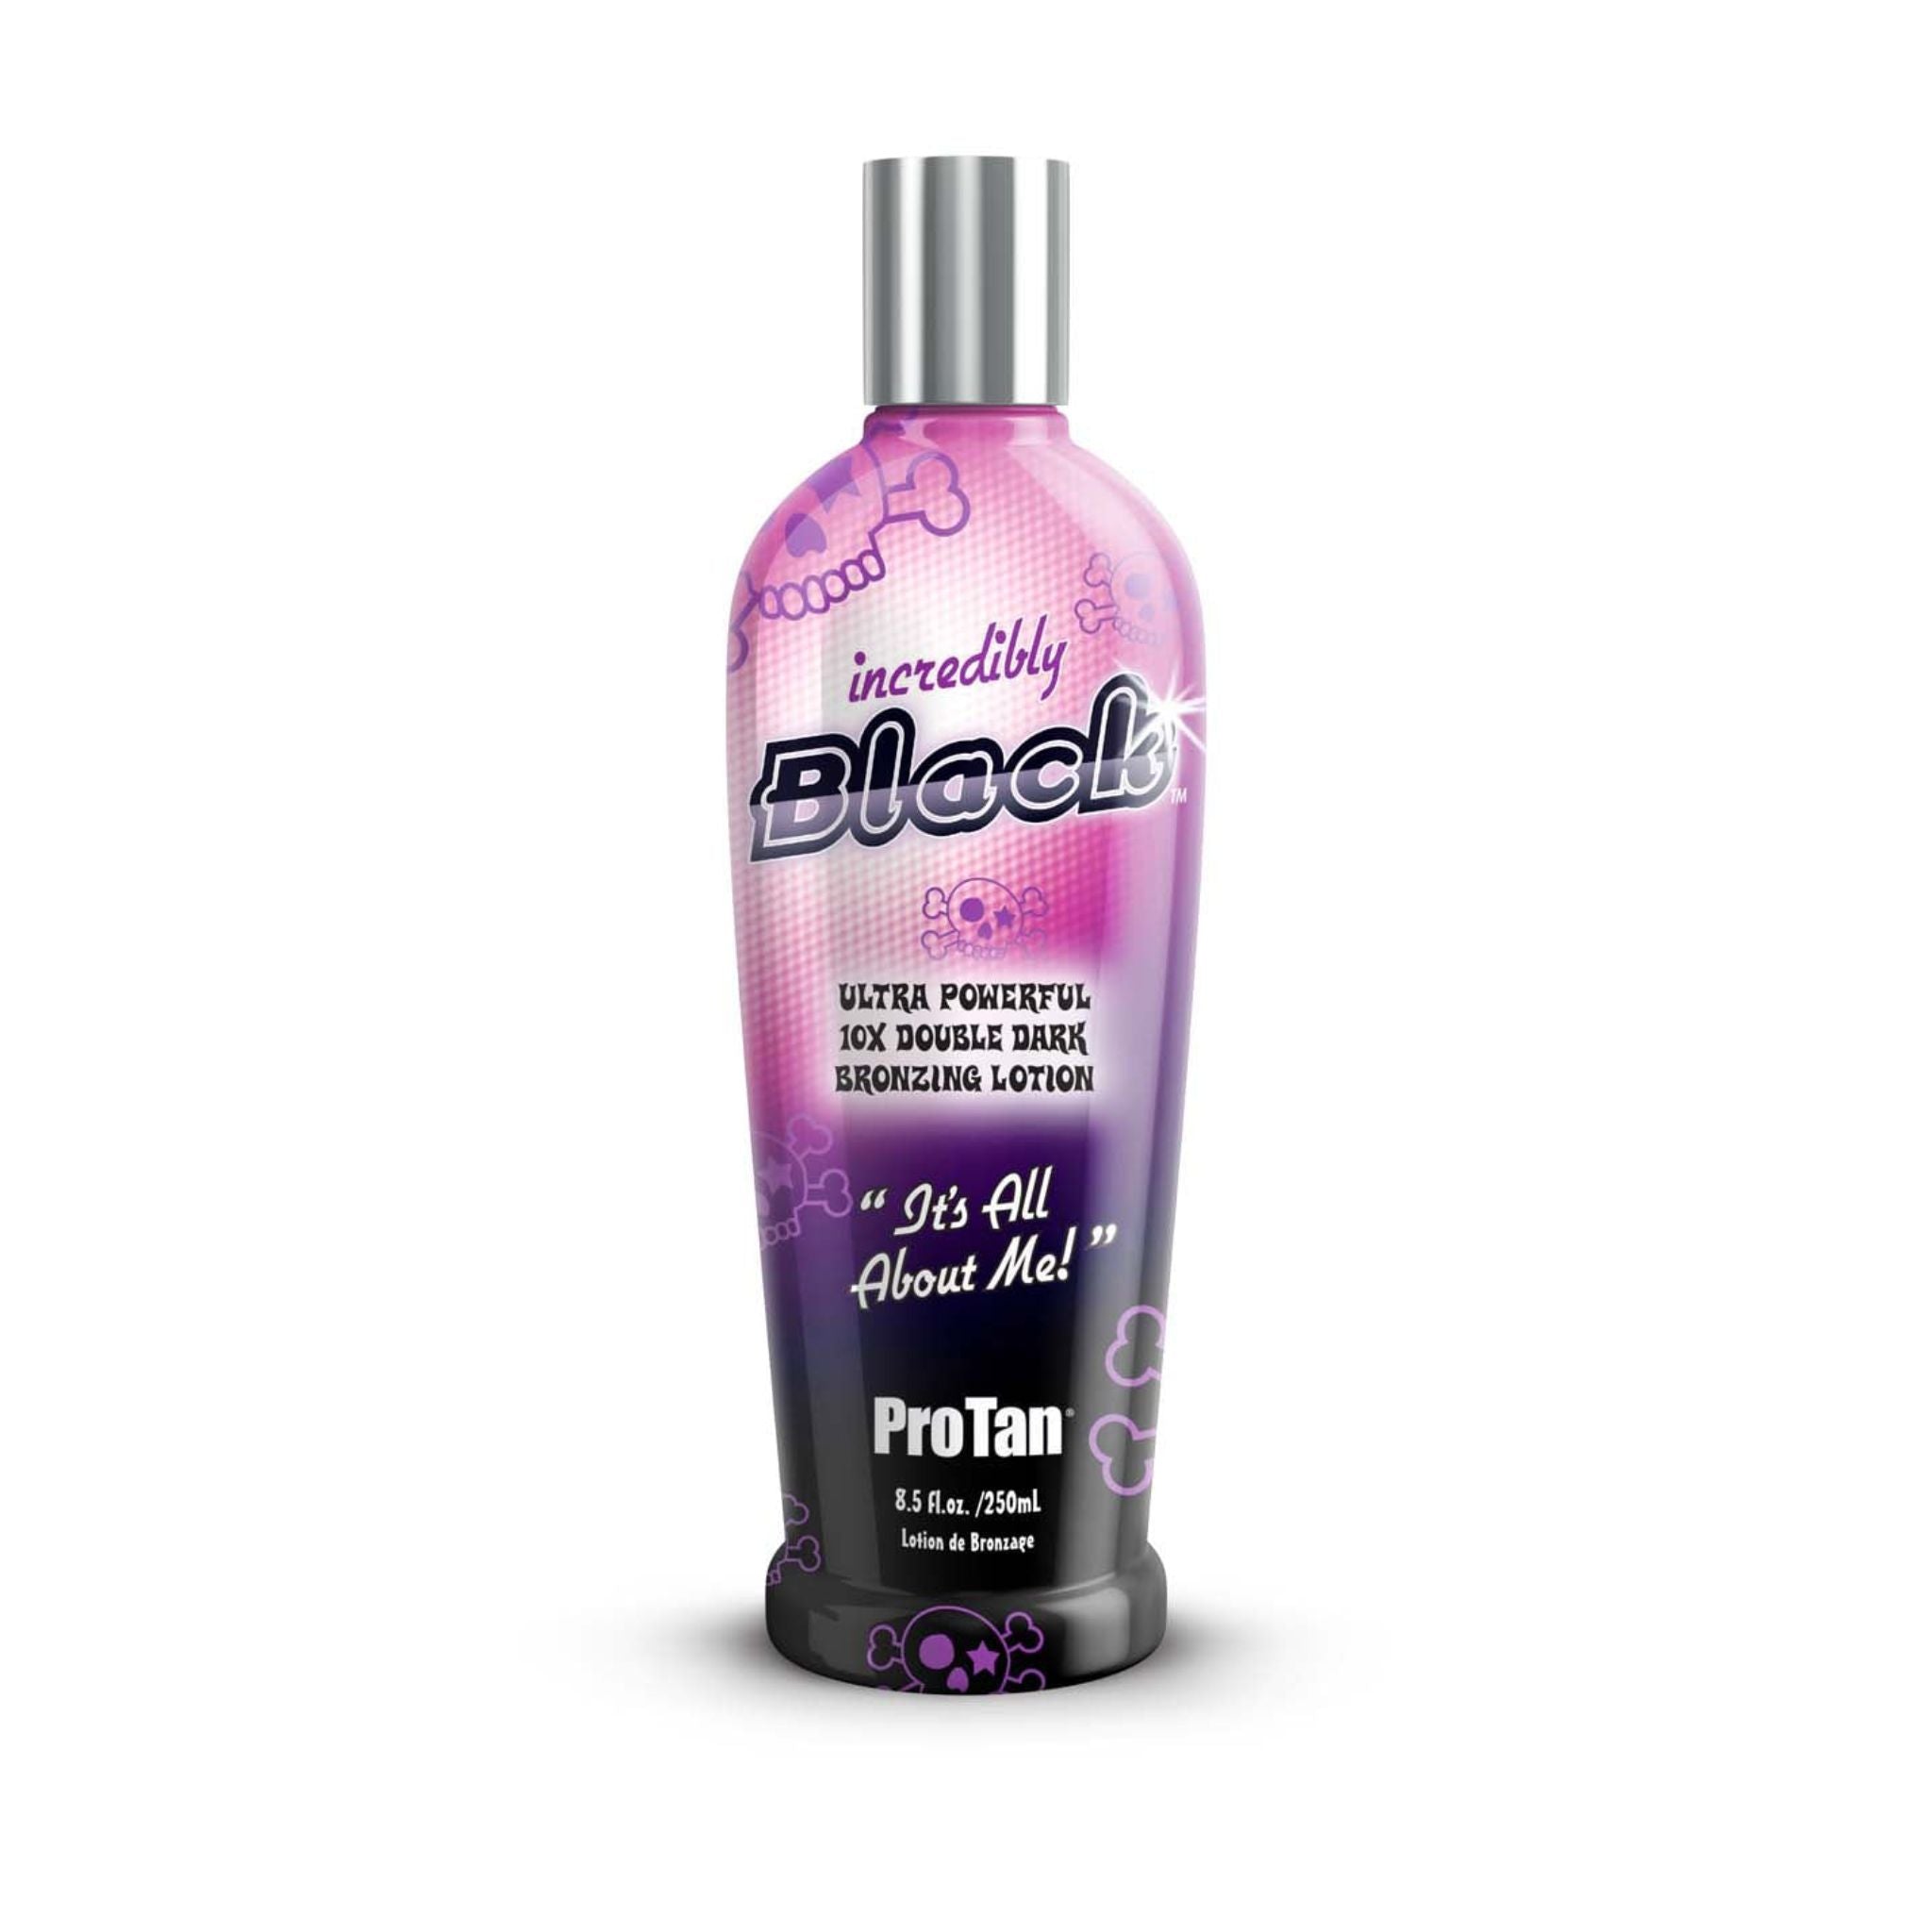 ProTan Incredibly Black Ultra-Powerful Tanning Lotion Tanning Lotion